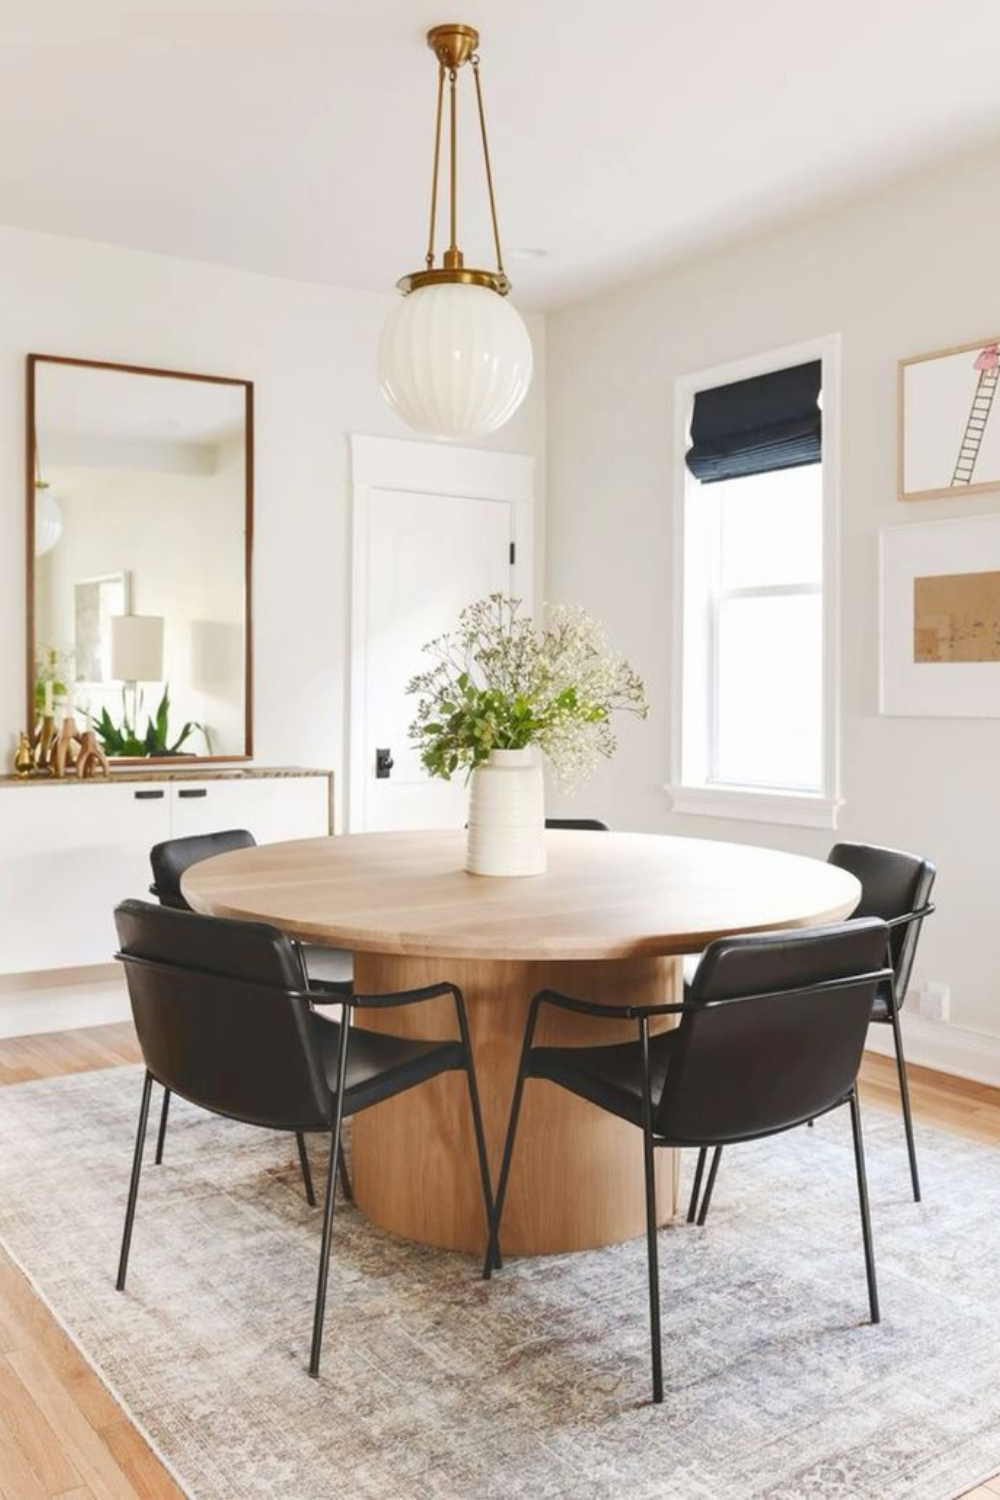 Easy Ways to Make a Dining Area in a Small Space